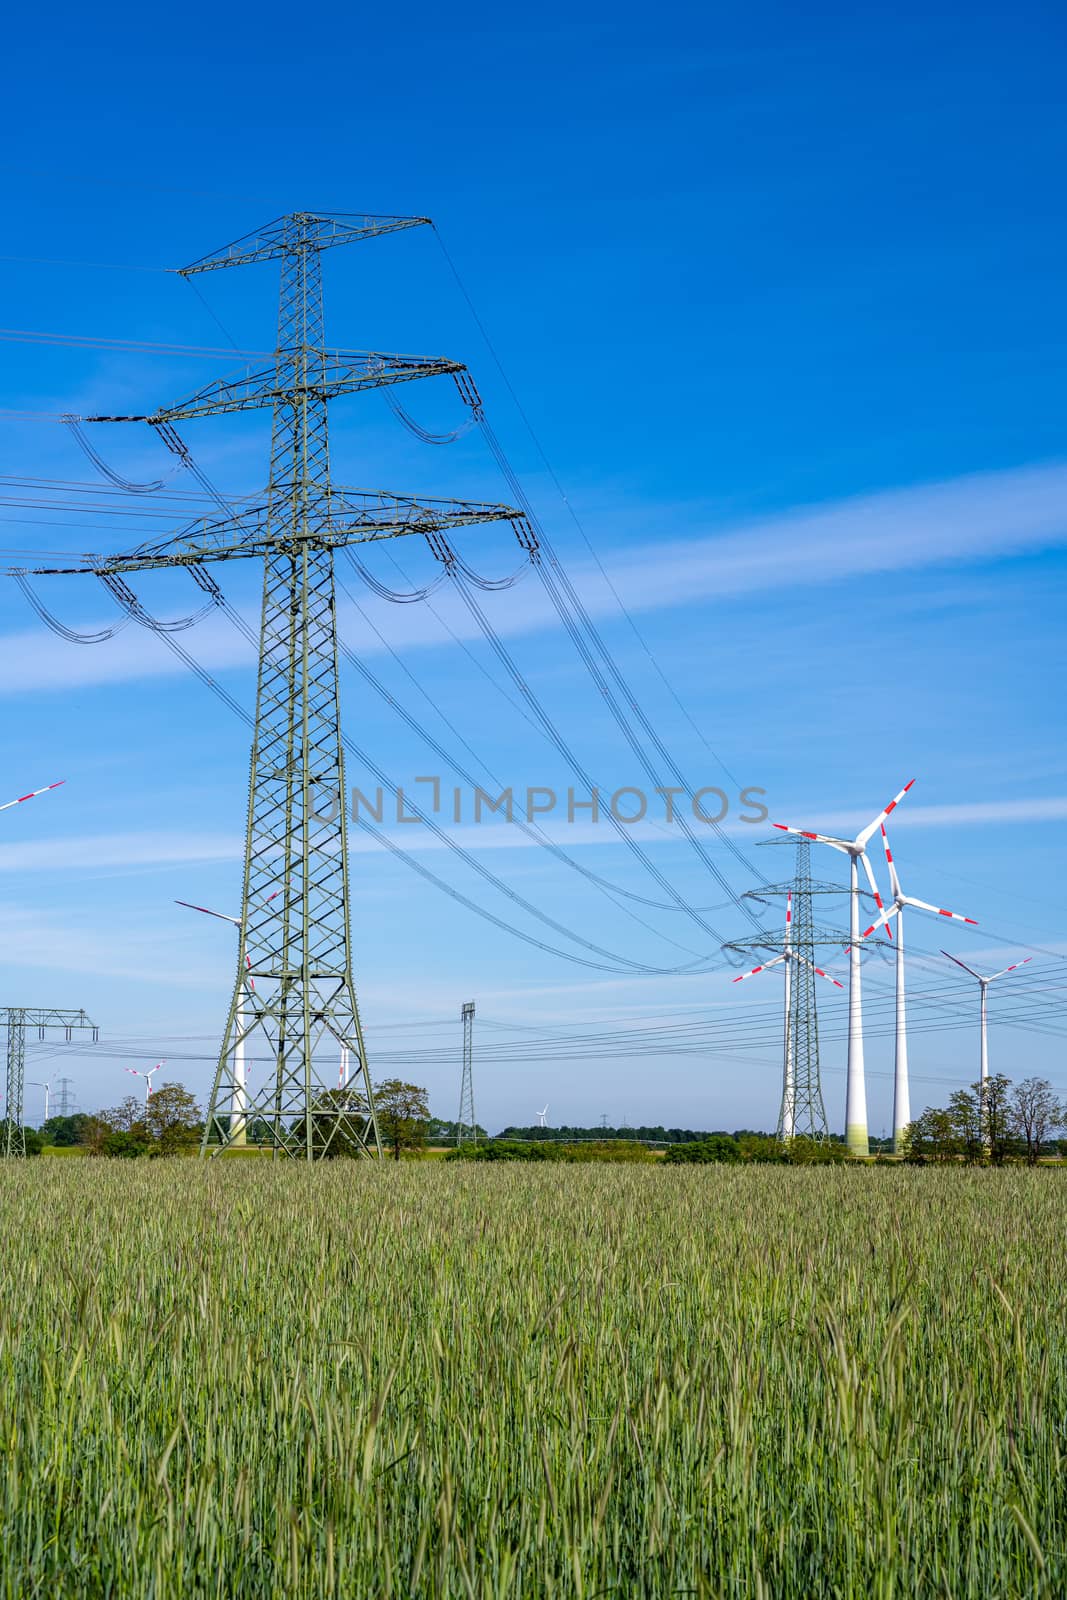 Overhead power lines and wind turbines seen in Germany